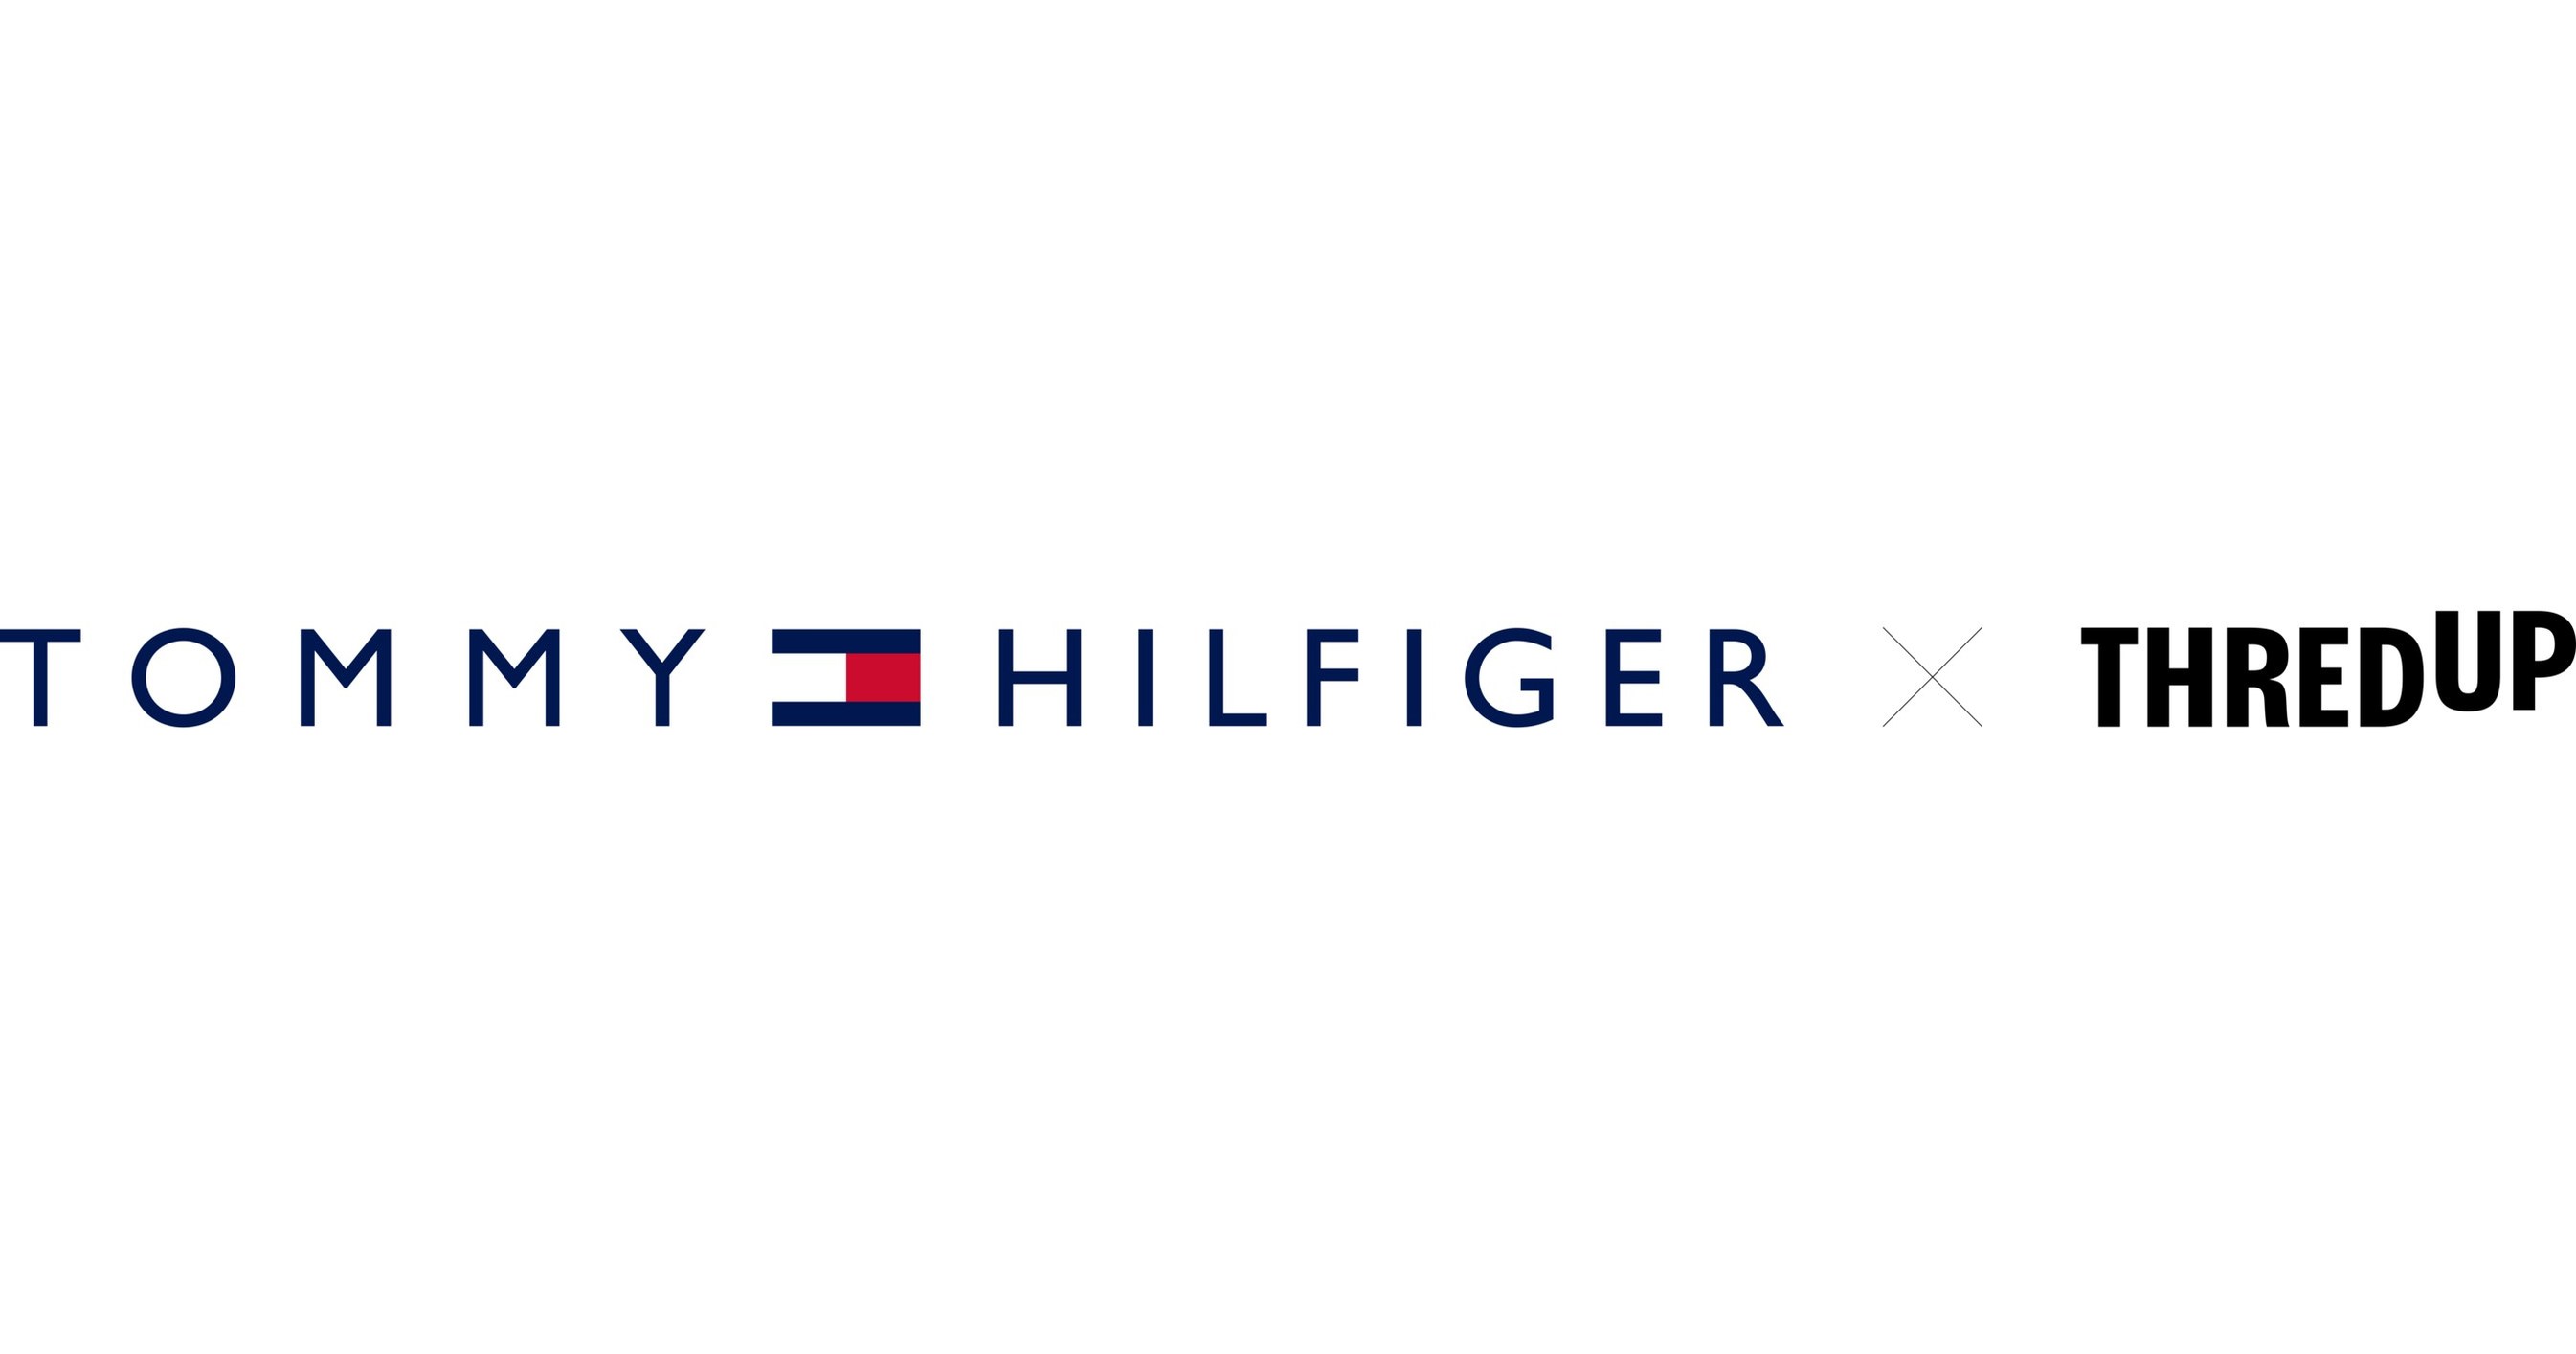 Tommy Hilfiger and thredUP Join Forces to Launch Resale Program the States